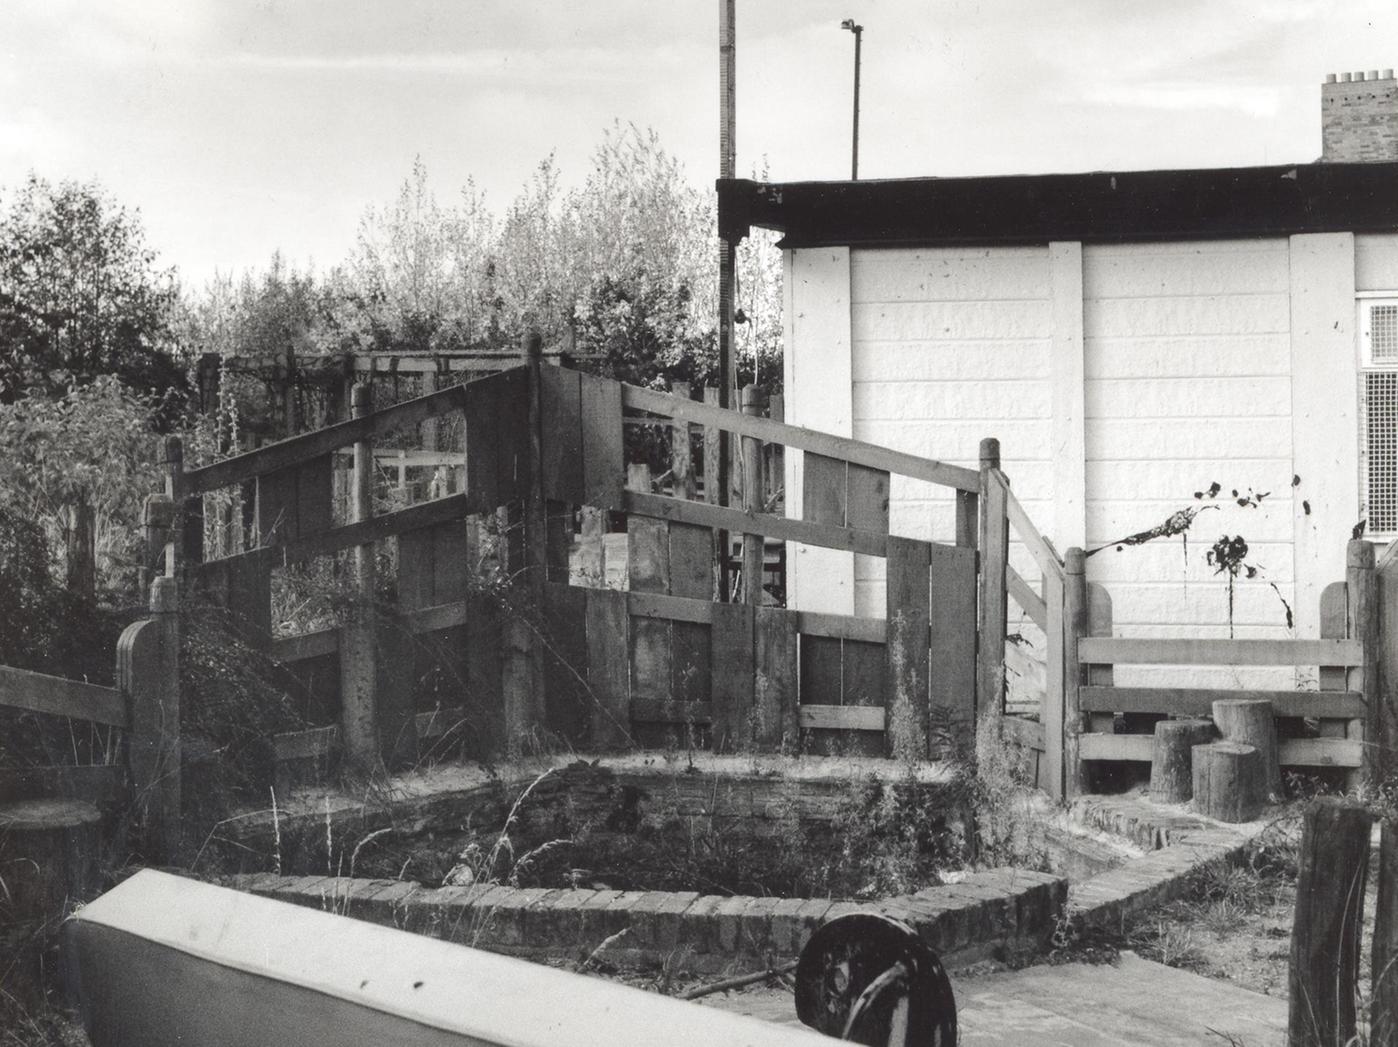 This adventure playground in Seacroft which had given pleasure to thousands of children over more than 20 years was deserted, over grown and rat infested.